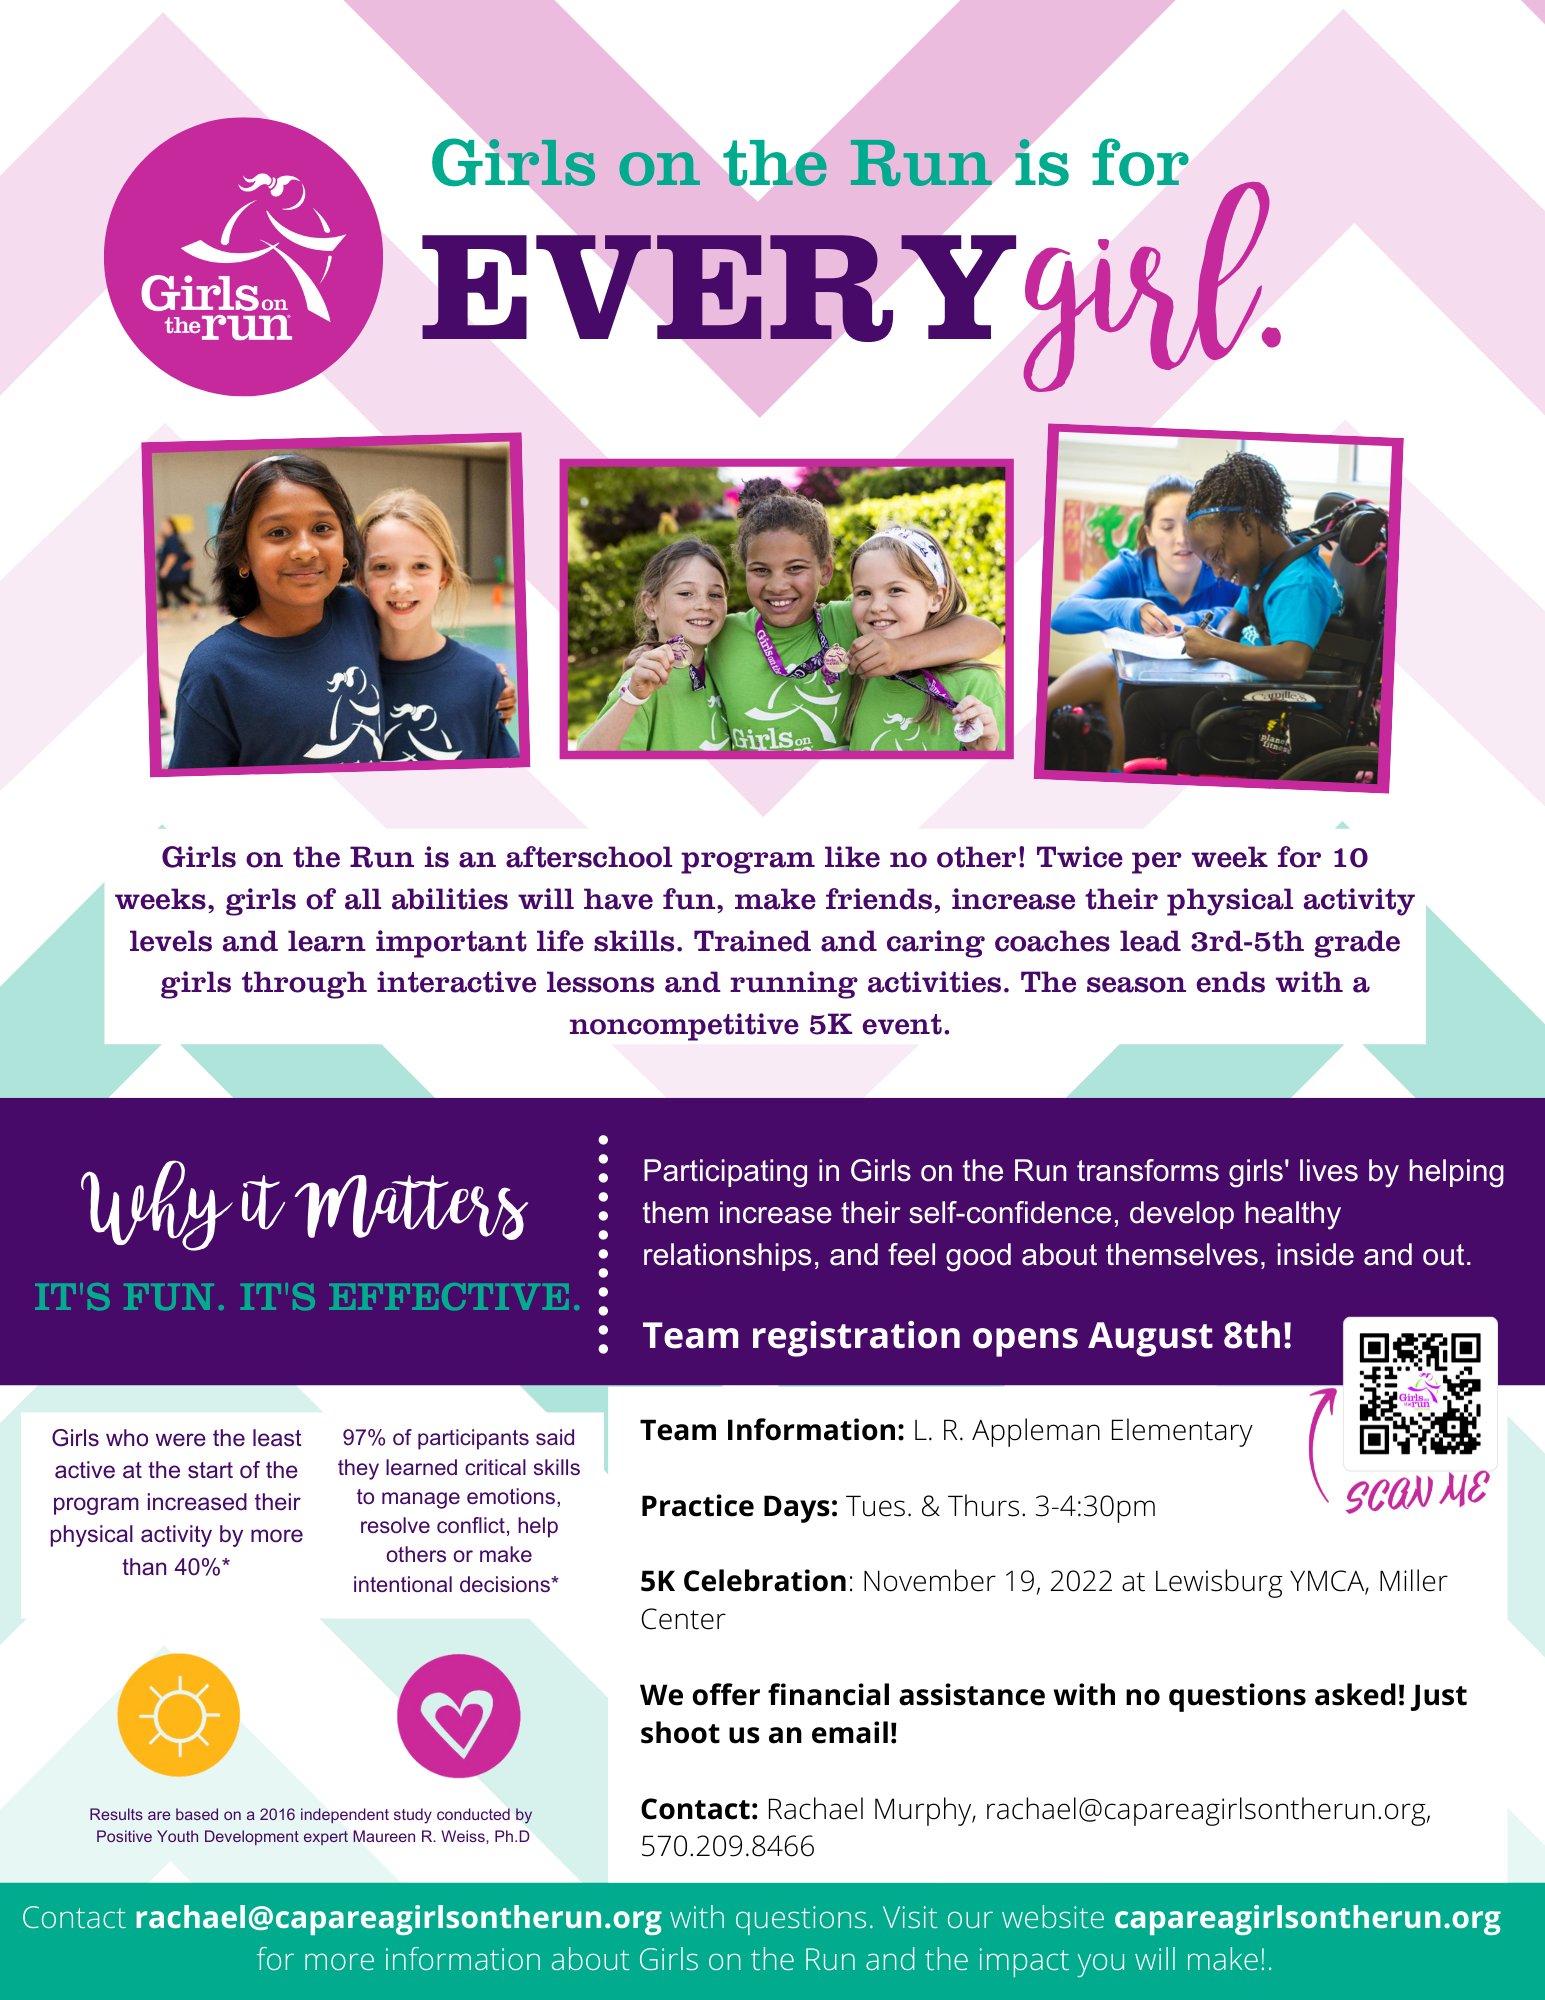 Girls on the Run flyer advertising signup information and details on the various activities students can participate in.